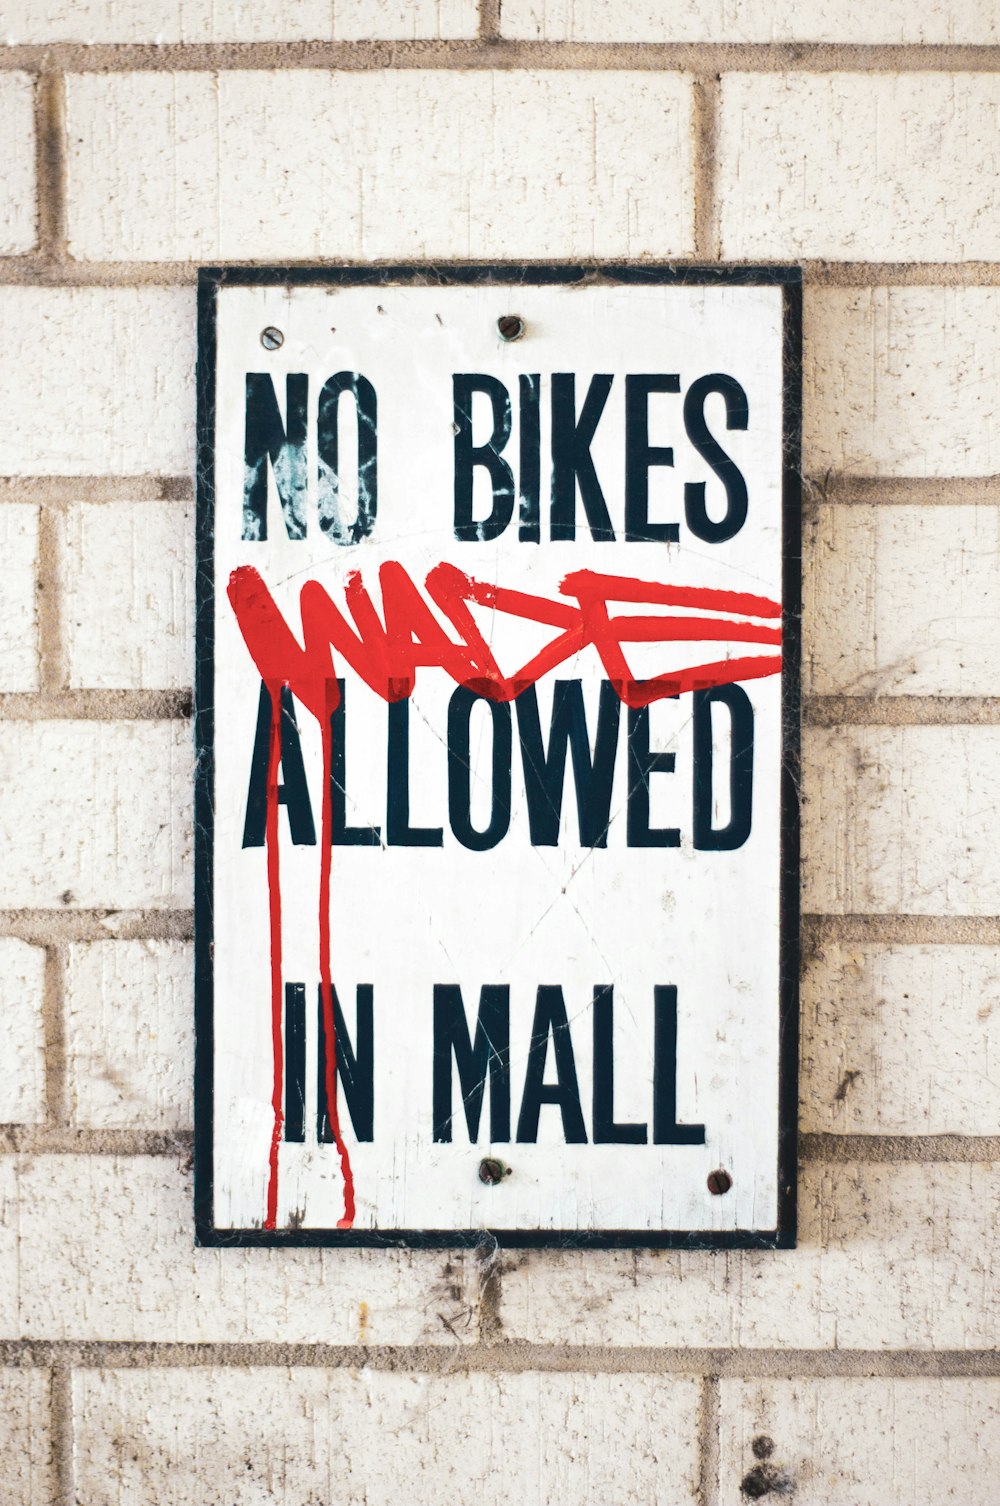 No Bikes Wade Allowed in Mall signage